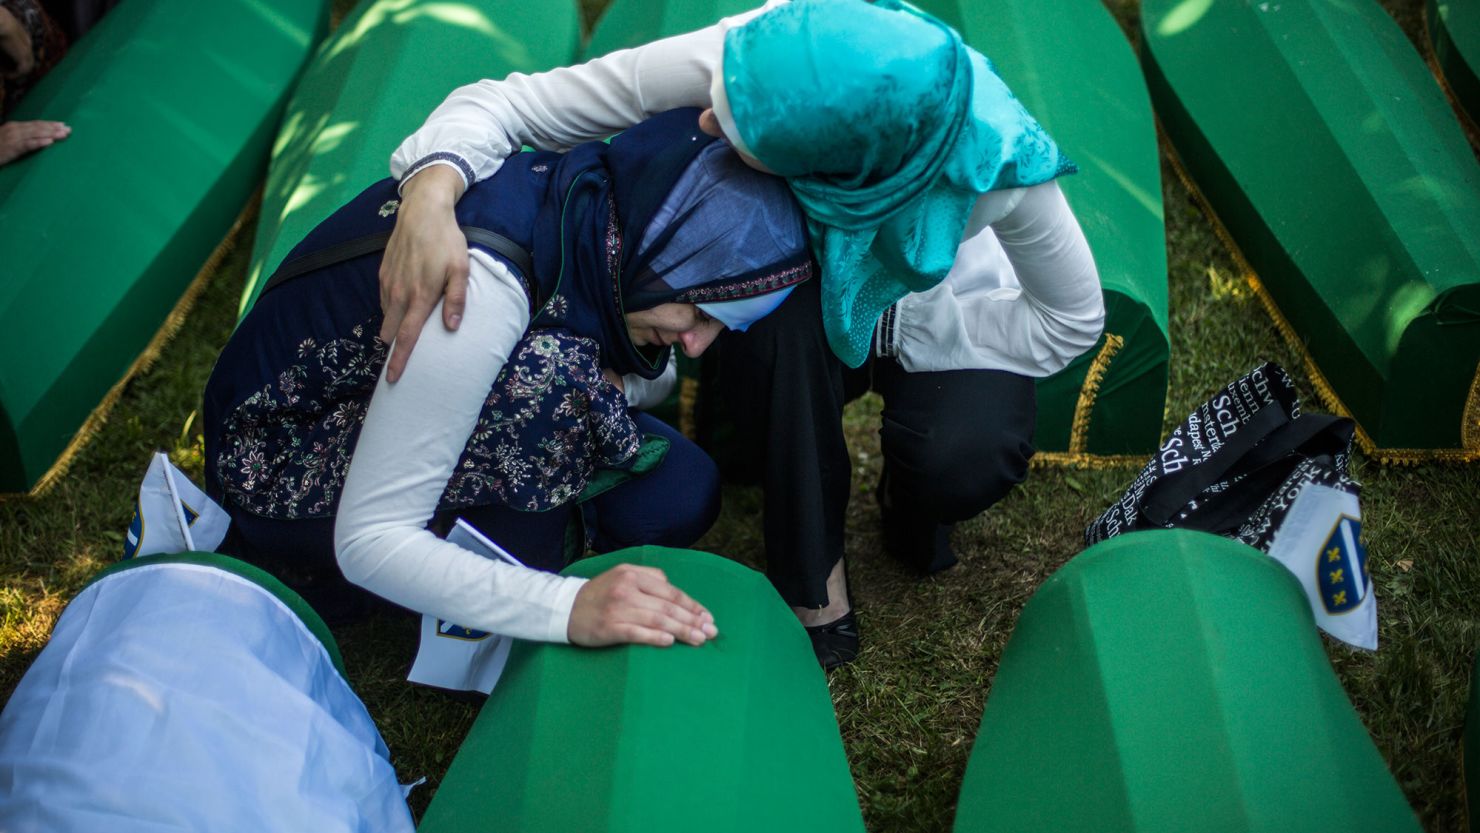 Women mourn at a mass funeral for 136 newly identified victims of the 1995 Srebrenica massacre at the Potocari cemetery and memorial in Srebrenica, Bosnia and Herzegovina on July 11, 2015. 